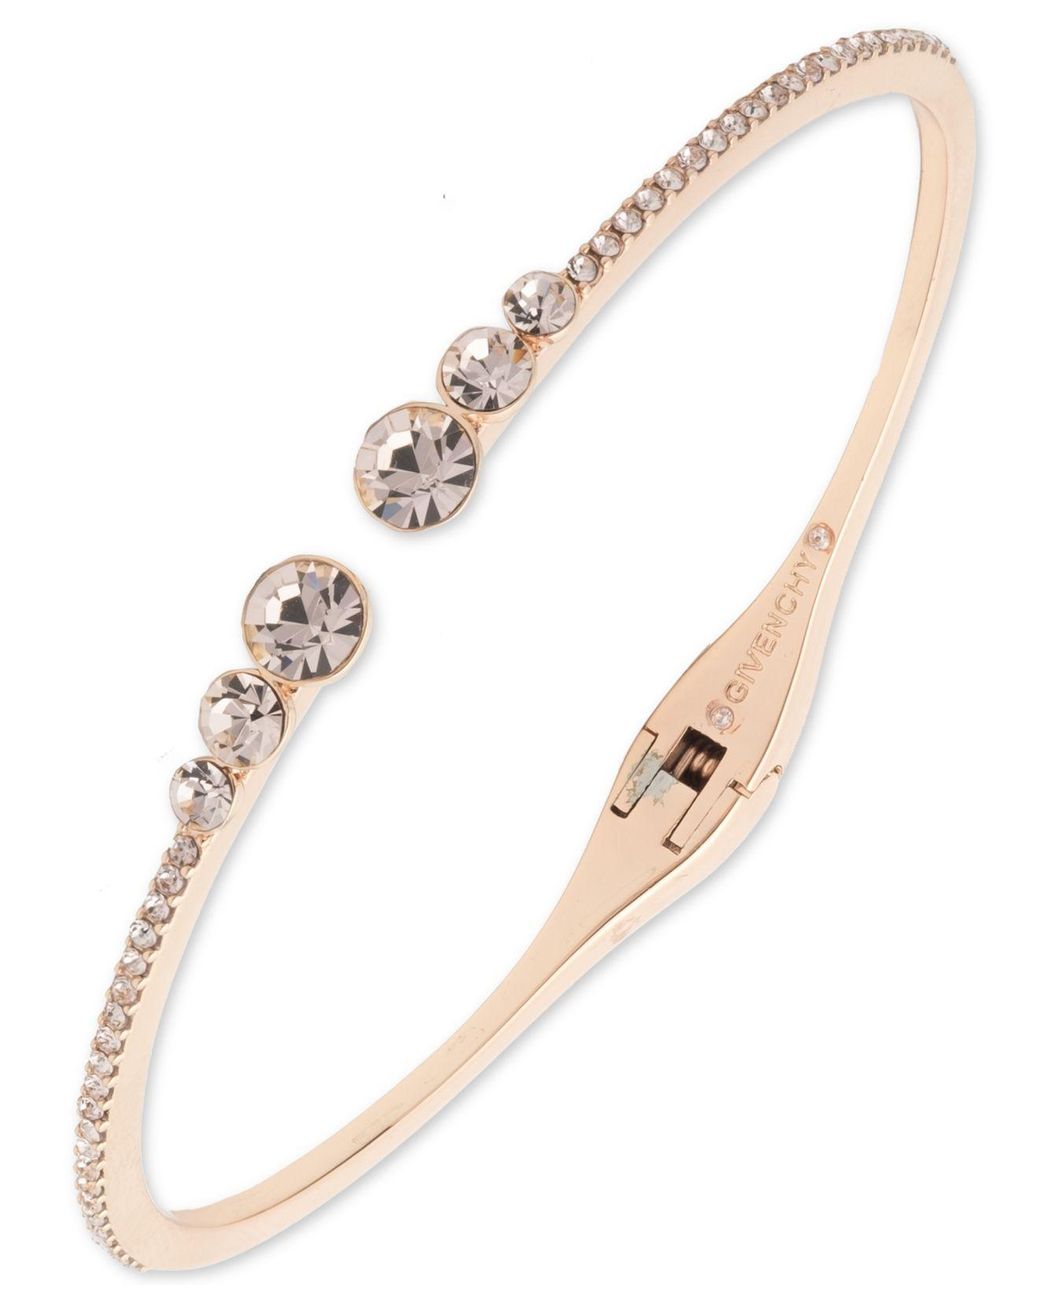 Givenchy Pavé Open Cuff Bracelet in Rose Gold (Metallic) - Lyst